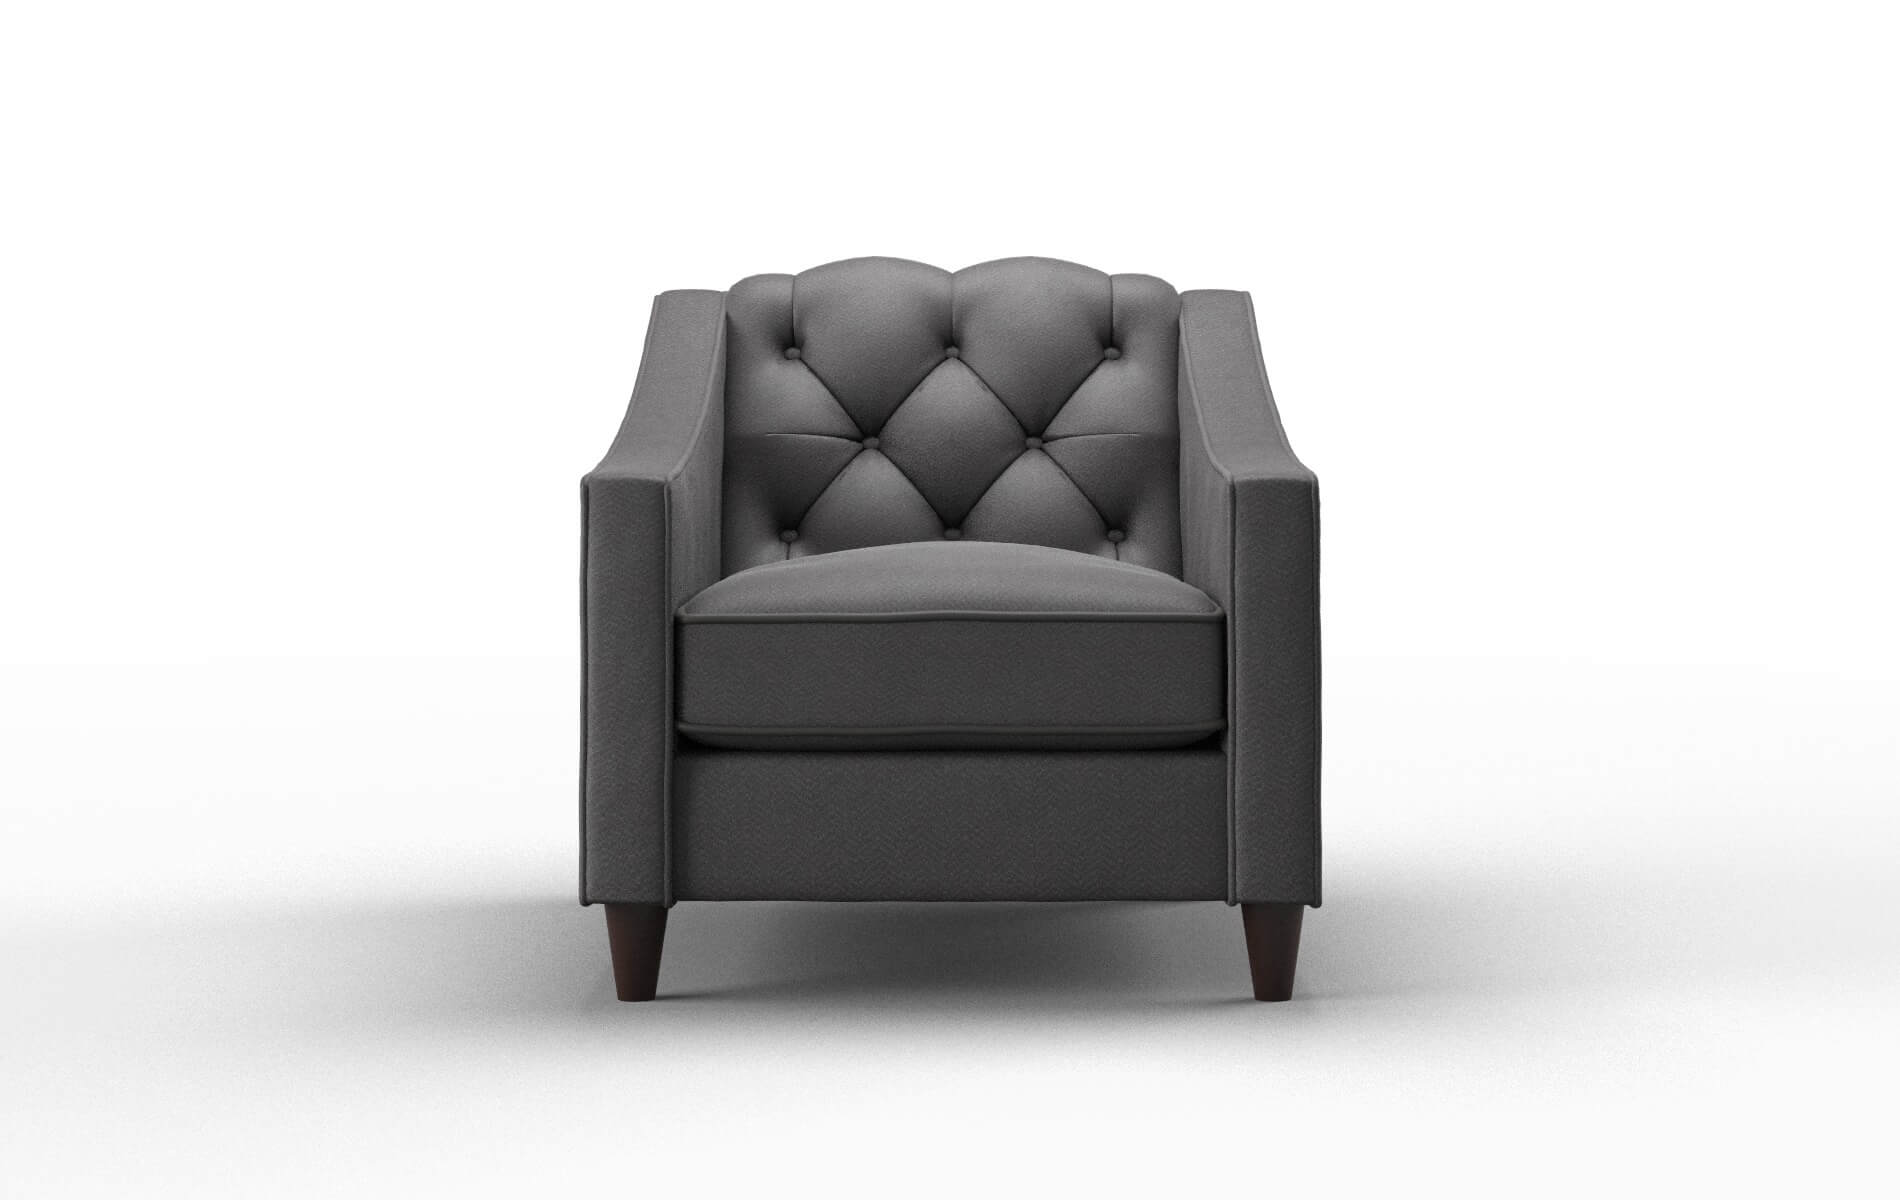 Manchester Catalina Charcoal chair espresso legs